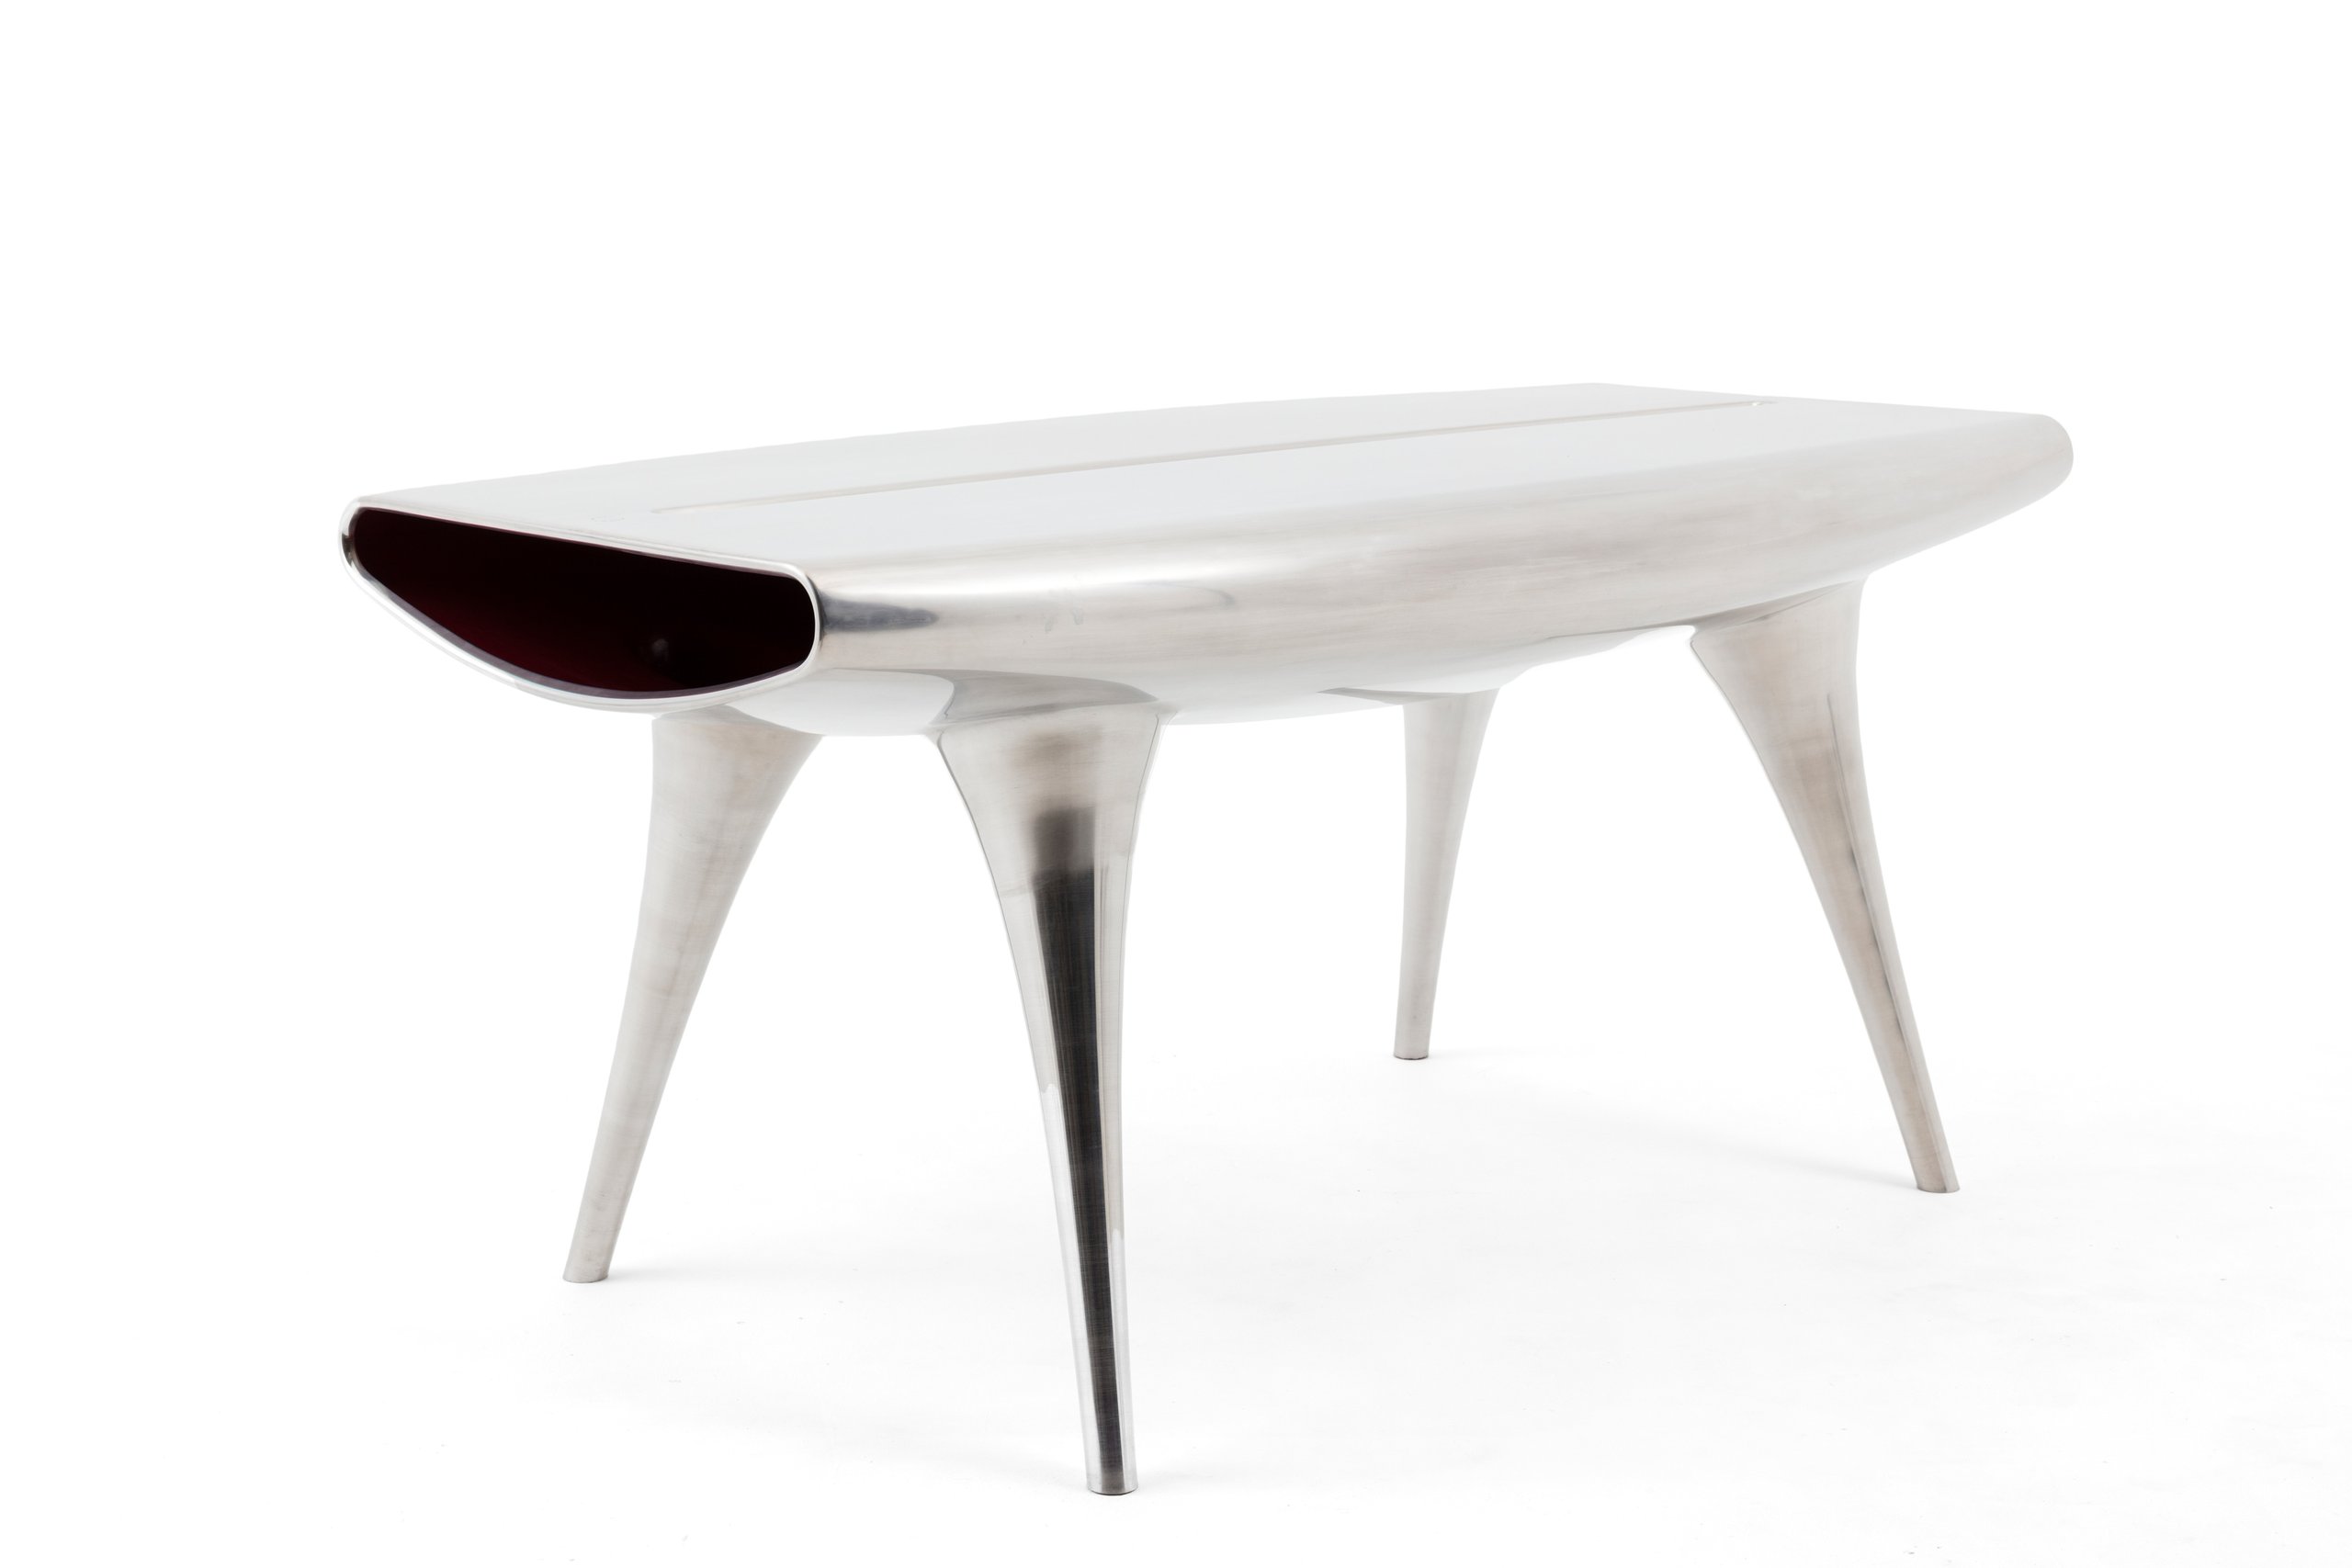 'Event Horizon' table by Marc Newson